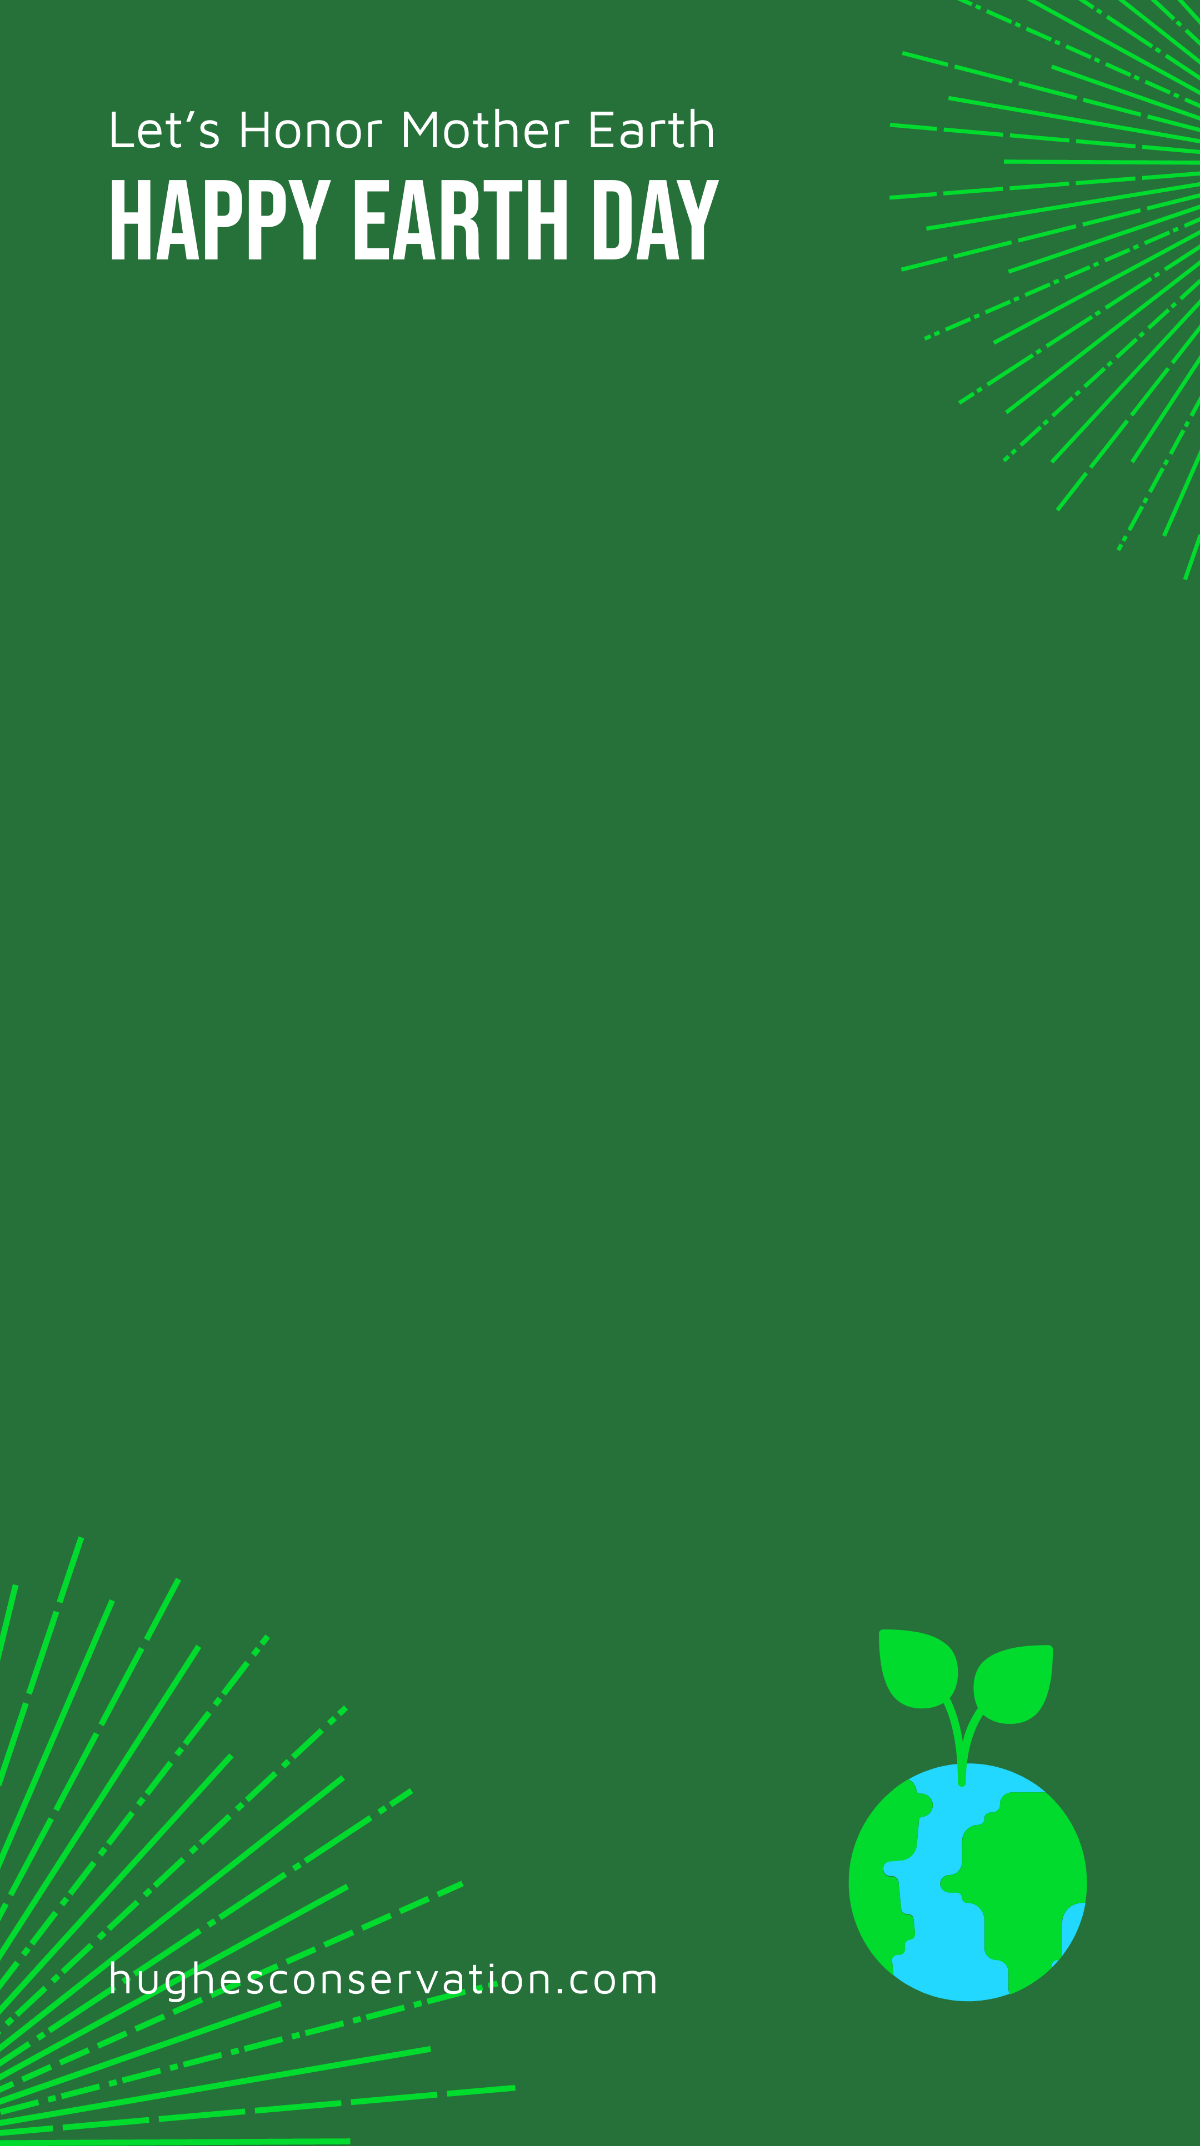 Happy Earth Day Snapchat Geofilter Template